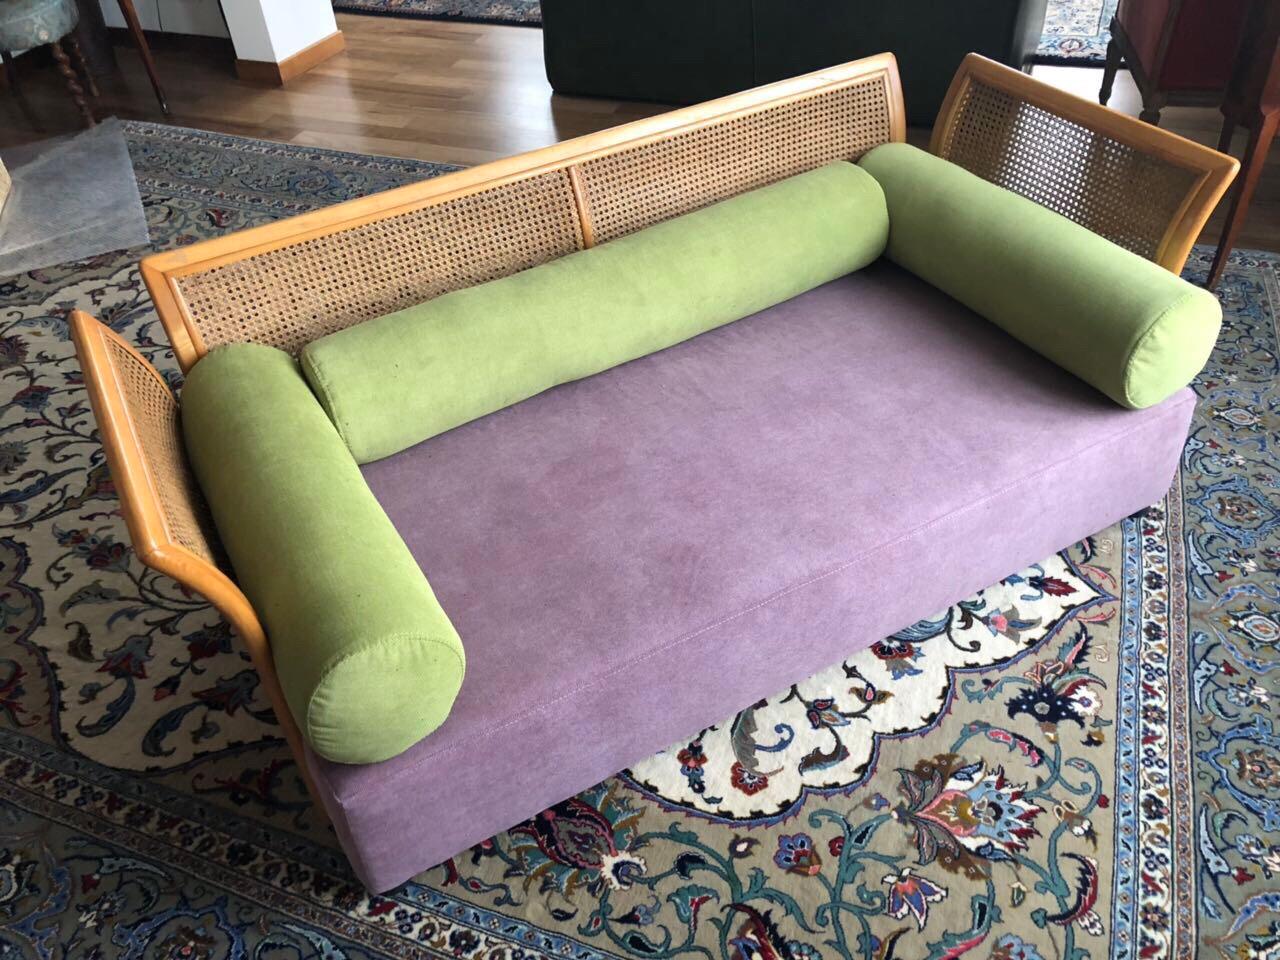 Machine-Made Cane Settee Purple Green New Upholstery, Mid-Century Modern, Italy For Sale